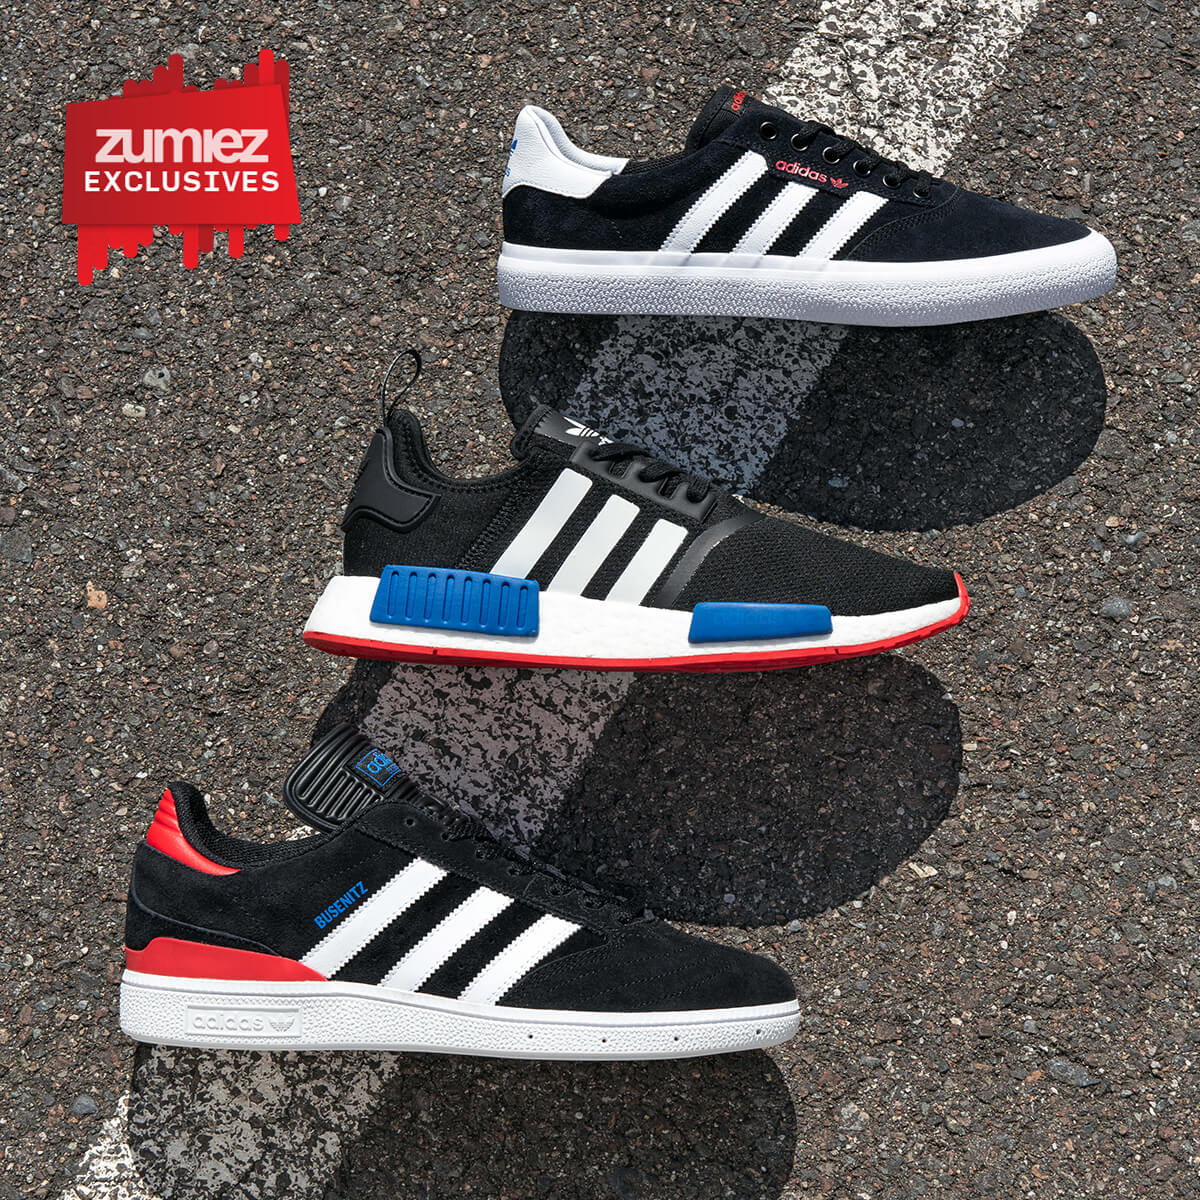 NEW ARRIVAL FOOTWEAR FROM ADIDAS AND MORE - SHOP SHOES